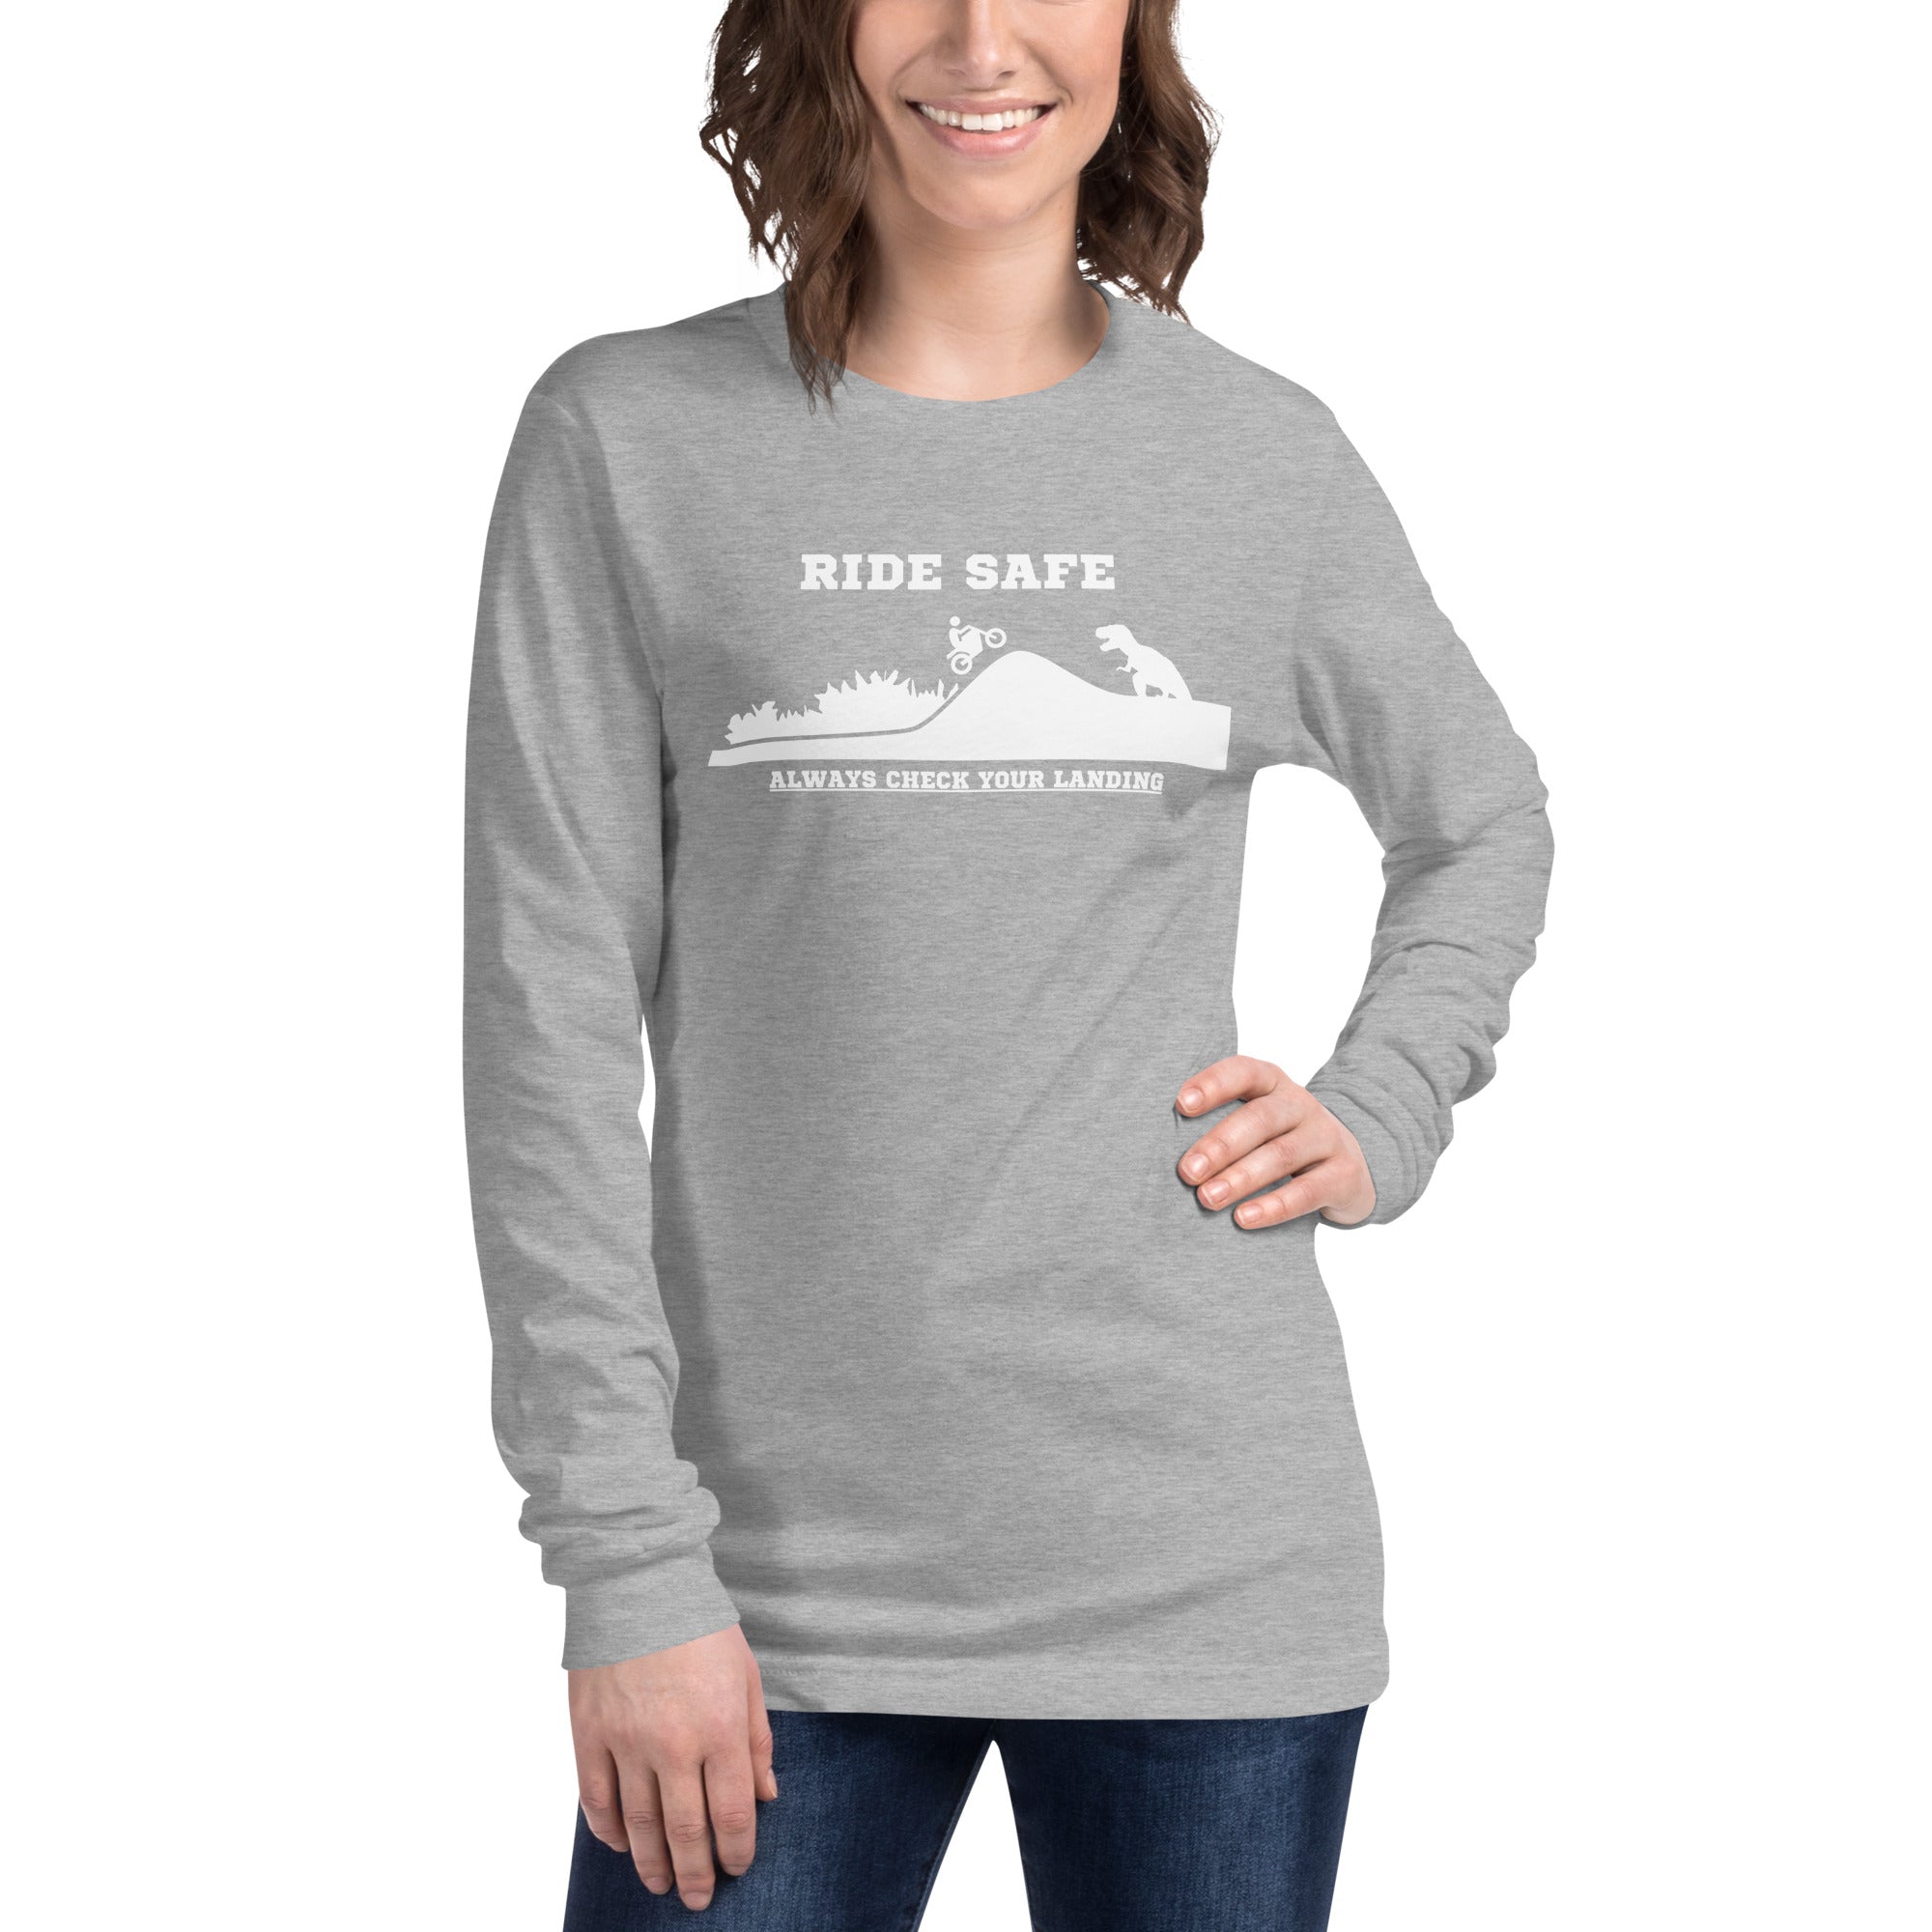 Ride Safe Check Your Landing Women's Select Long Sleeve